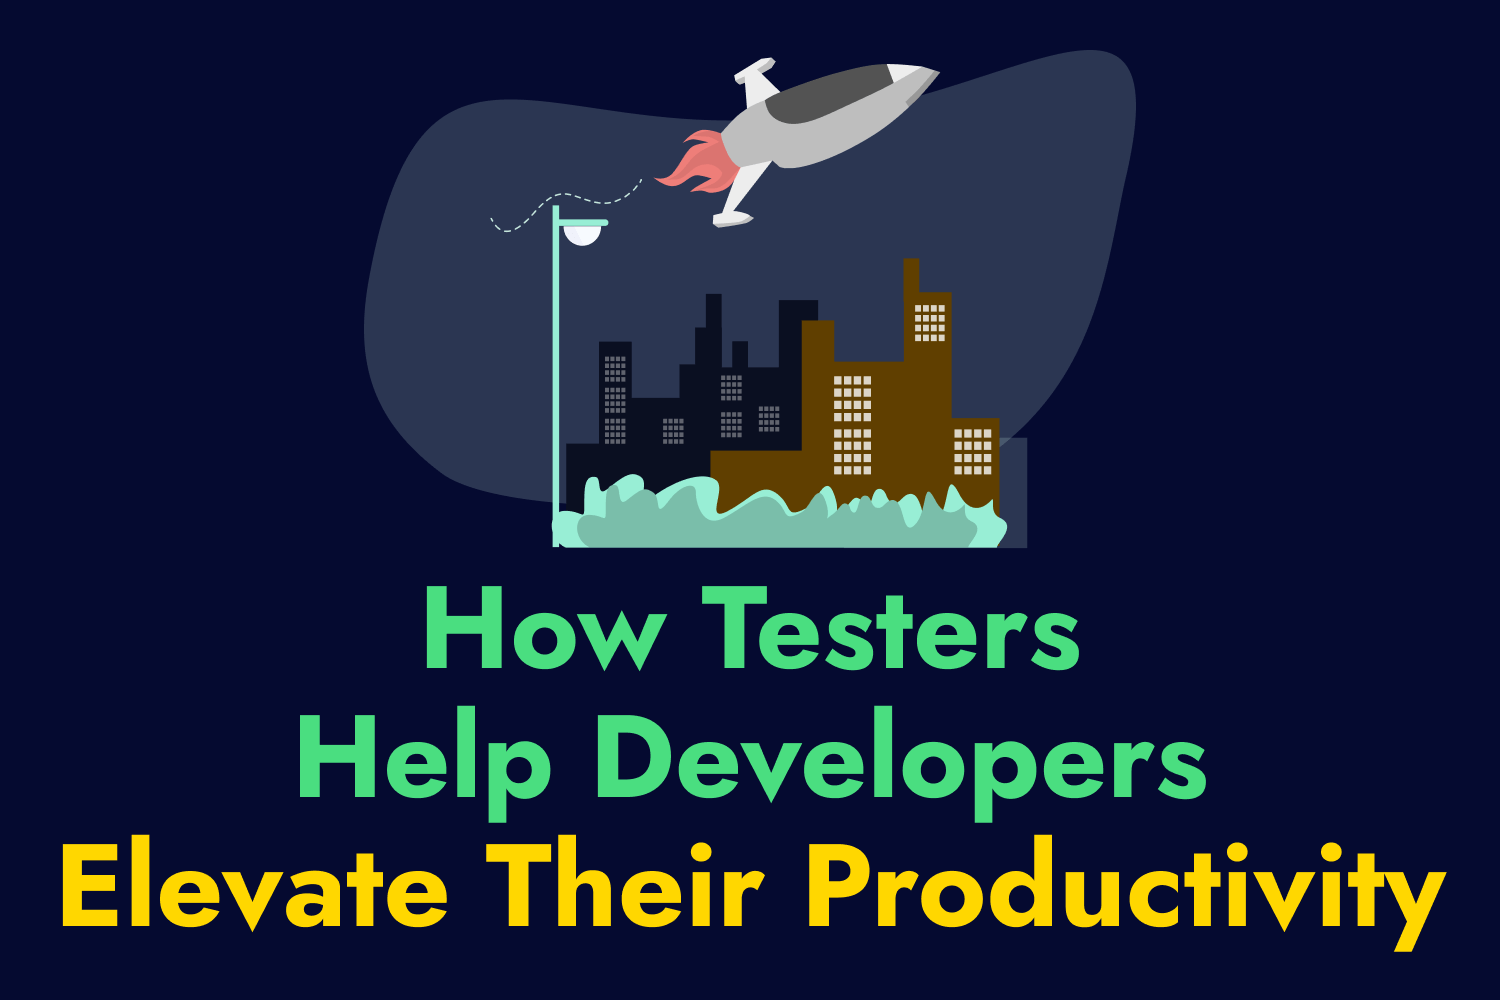 How Testers Help Developers Elevate Their Productivity